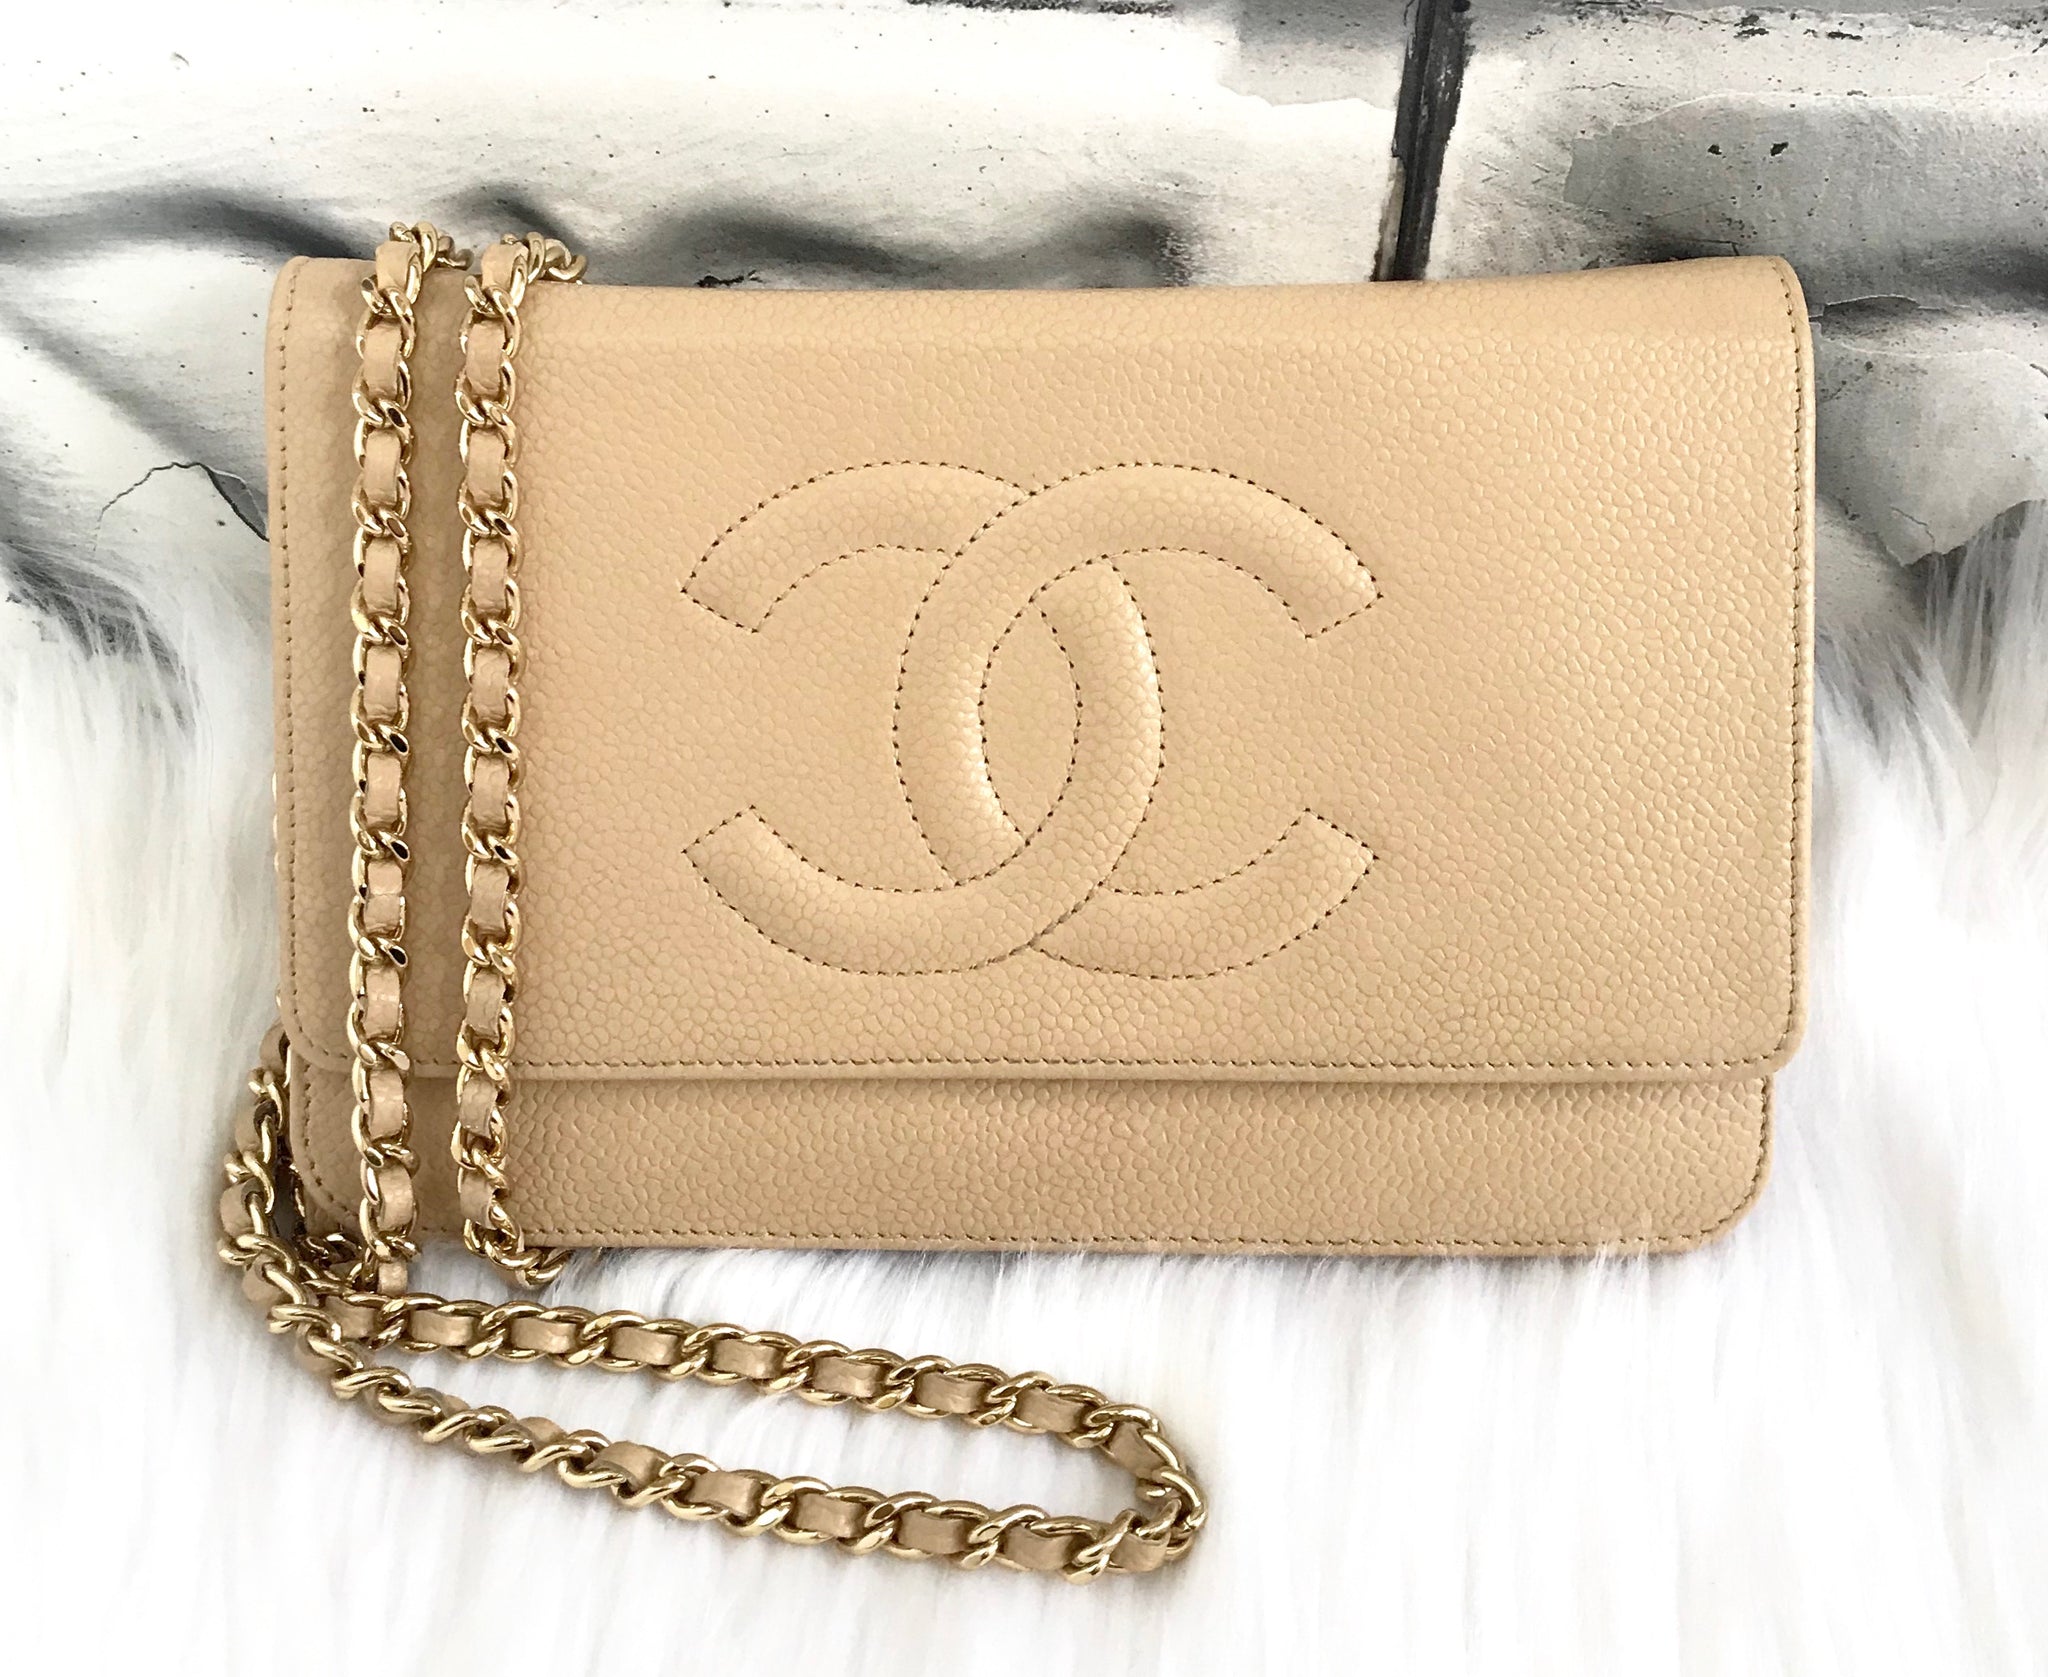 ❌SOLD❌ Chanel Classic Wallet on Chain in nude beige caviar leather with  gold hardware. 26 series. Excellent condition, 9.5/10. Comes with…